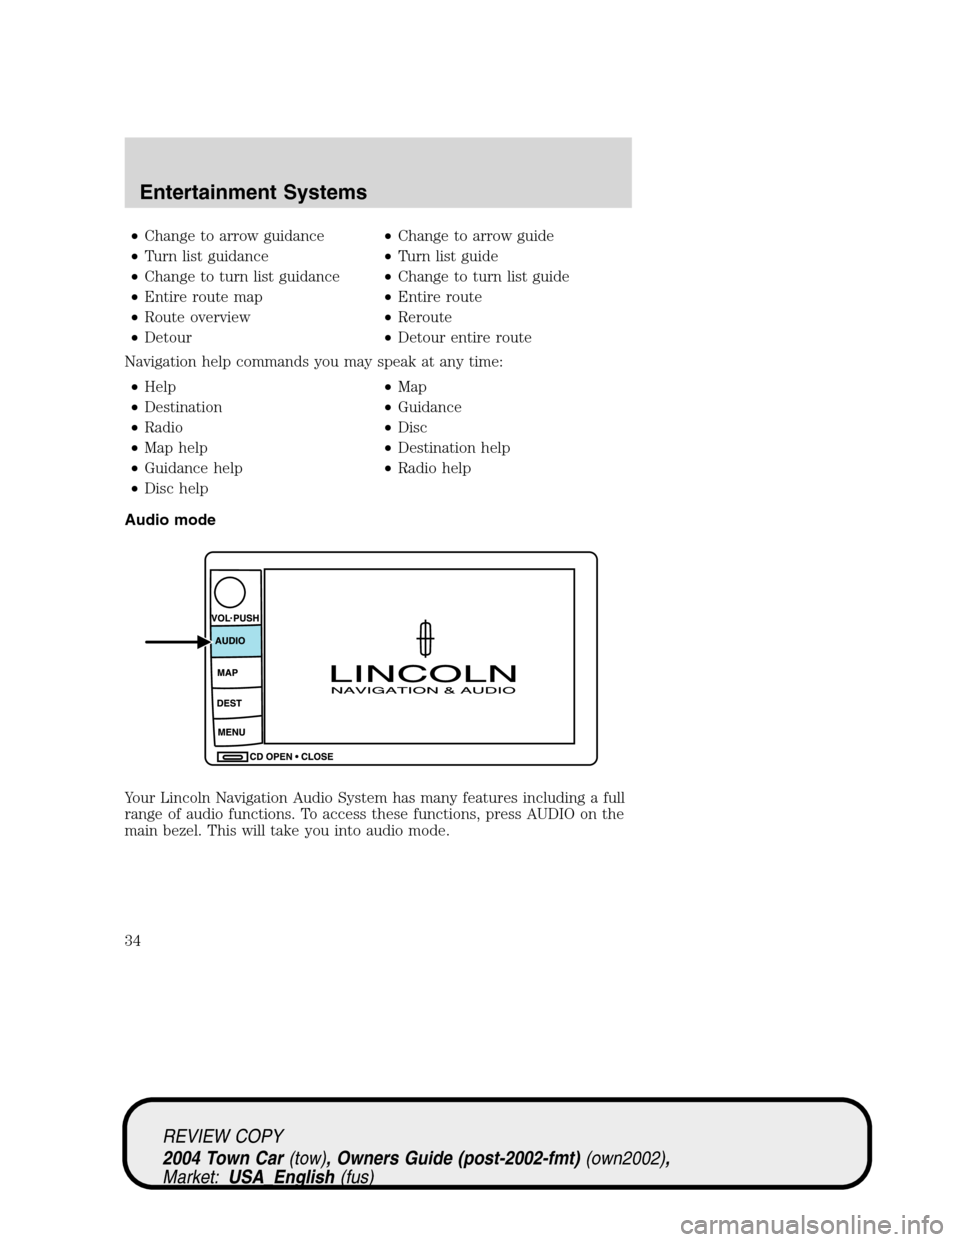 LINCOLN TOWN CAR 2004 Owners Guide •Change to arrow guidance•Change to arrow guide
•Turn list guidance•Turn list guide
•Change to turn list guidance•Change to turn list guide
•Entire route map•Entire route
•Route over